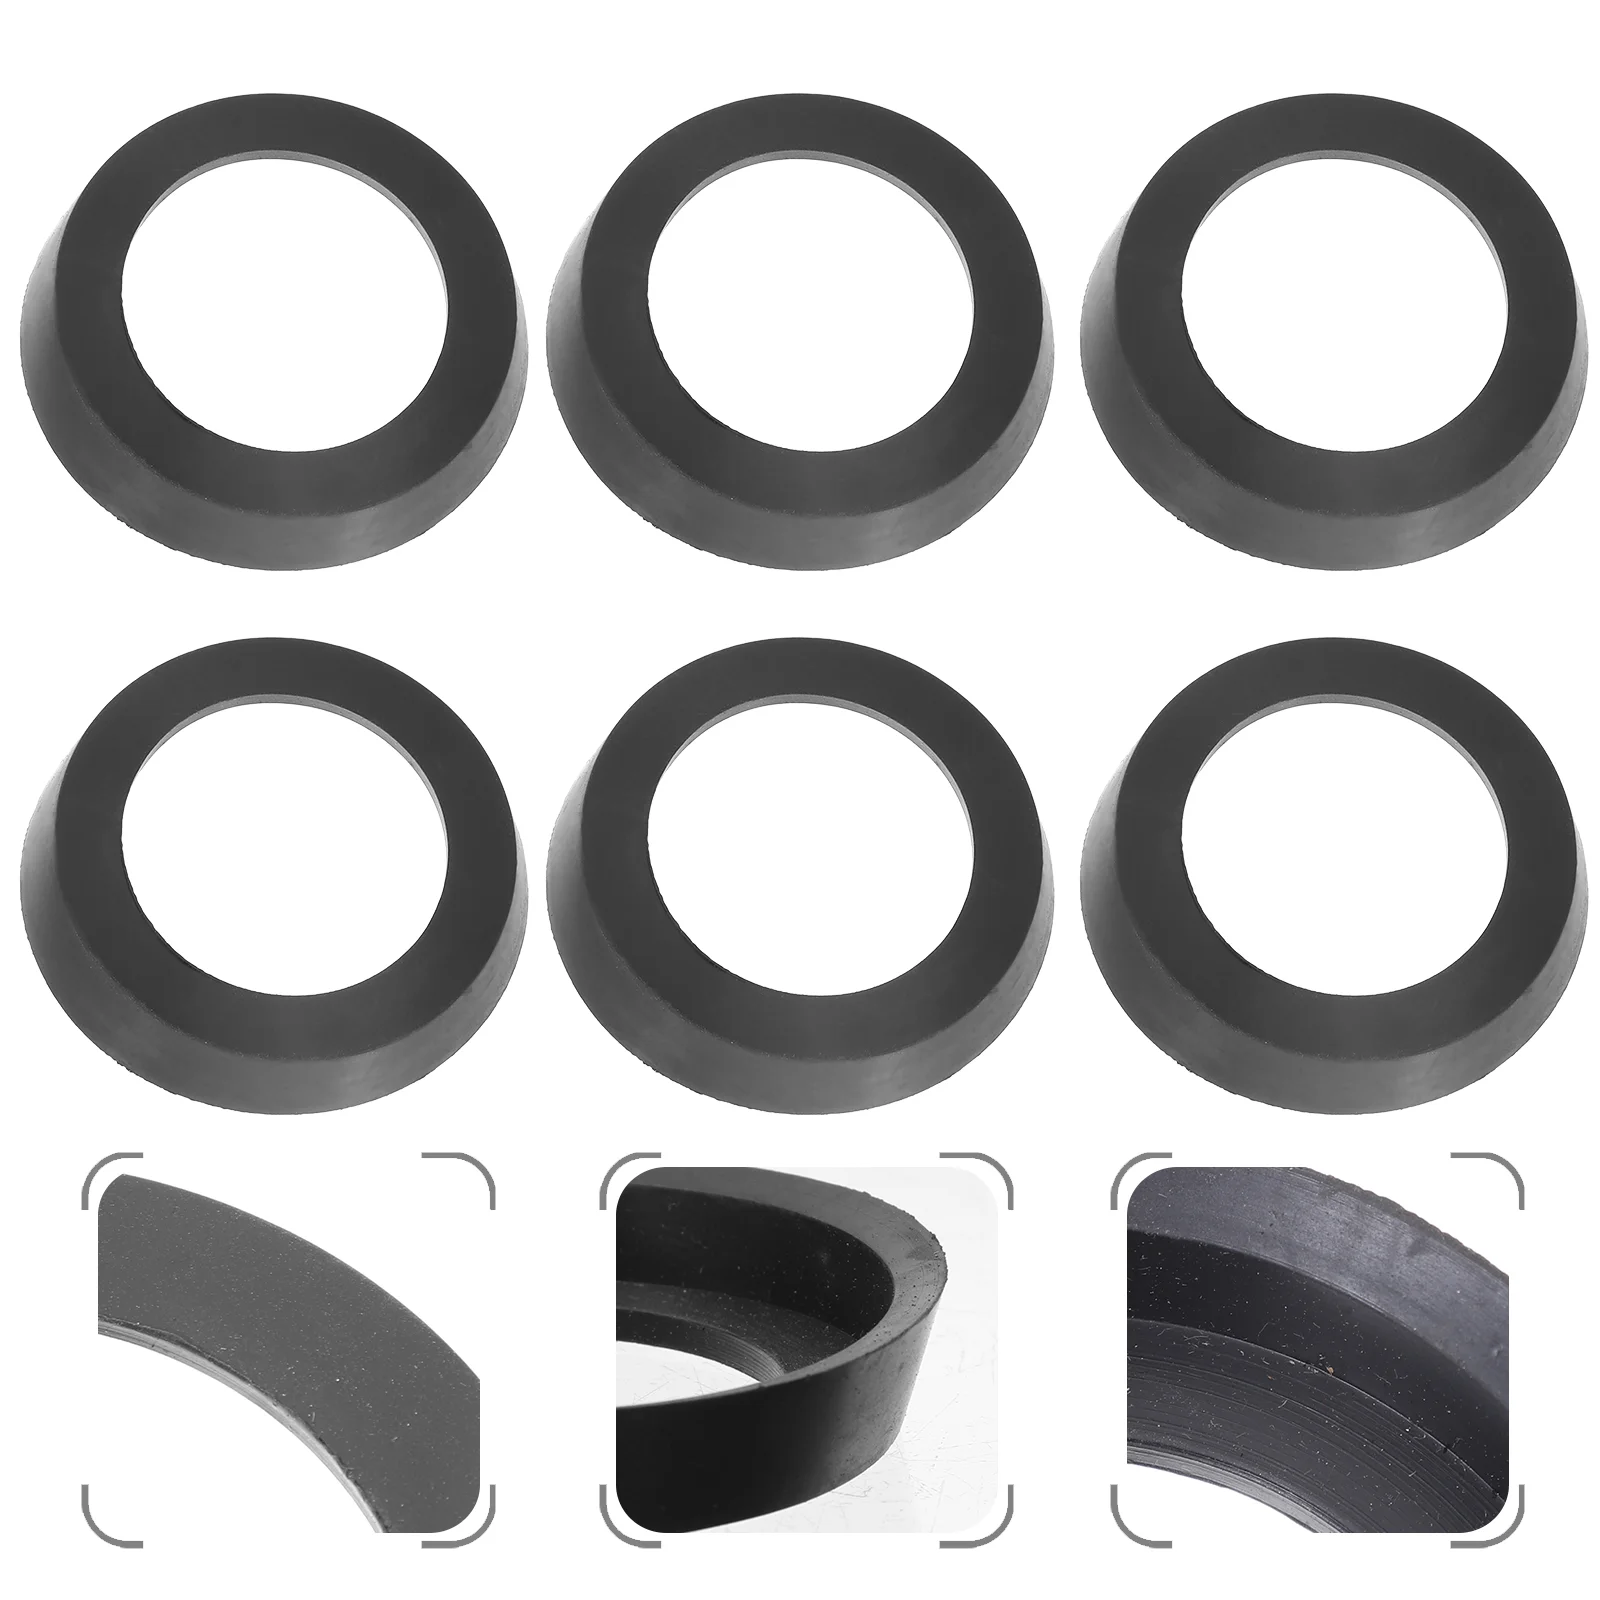 

6 Pcs Hand Pump Cup Water Jug Pitcher Parts Drive Accessories Replacement Bowl Rubber Seal